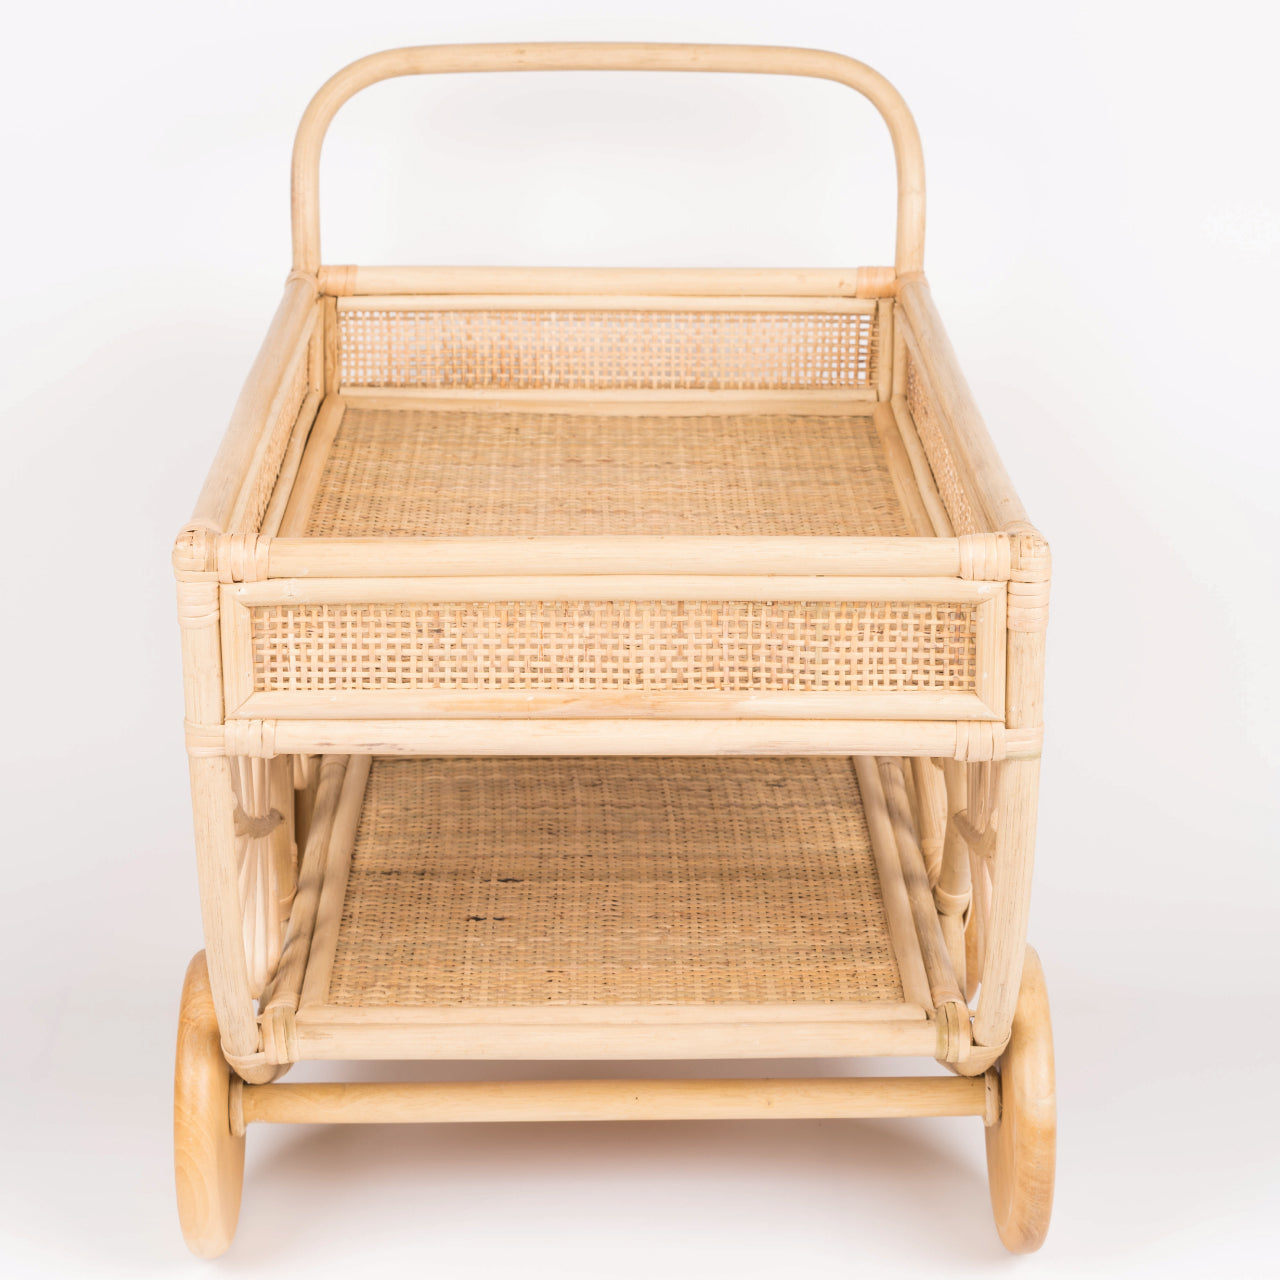 Tabby's Afternoon Tea and Snacks Cart Trolley | Shop Rattan Furniture and Toys Online | Kathy's Cove